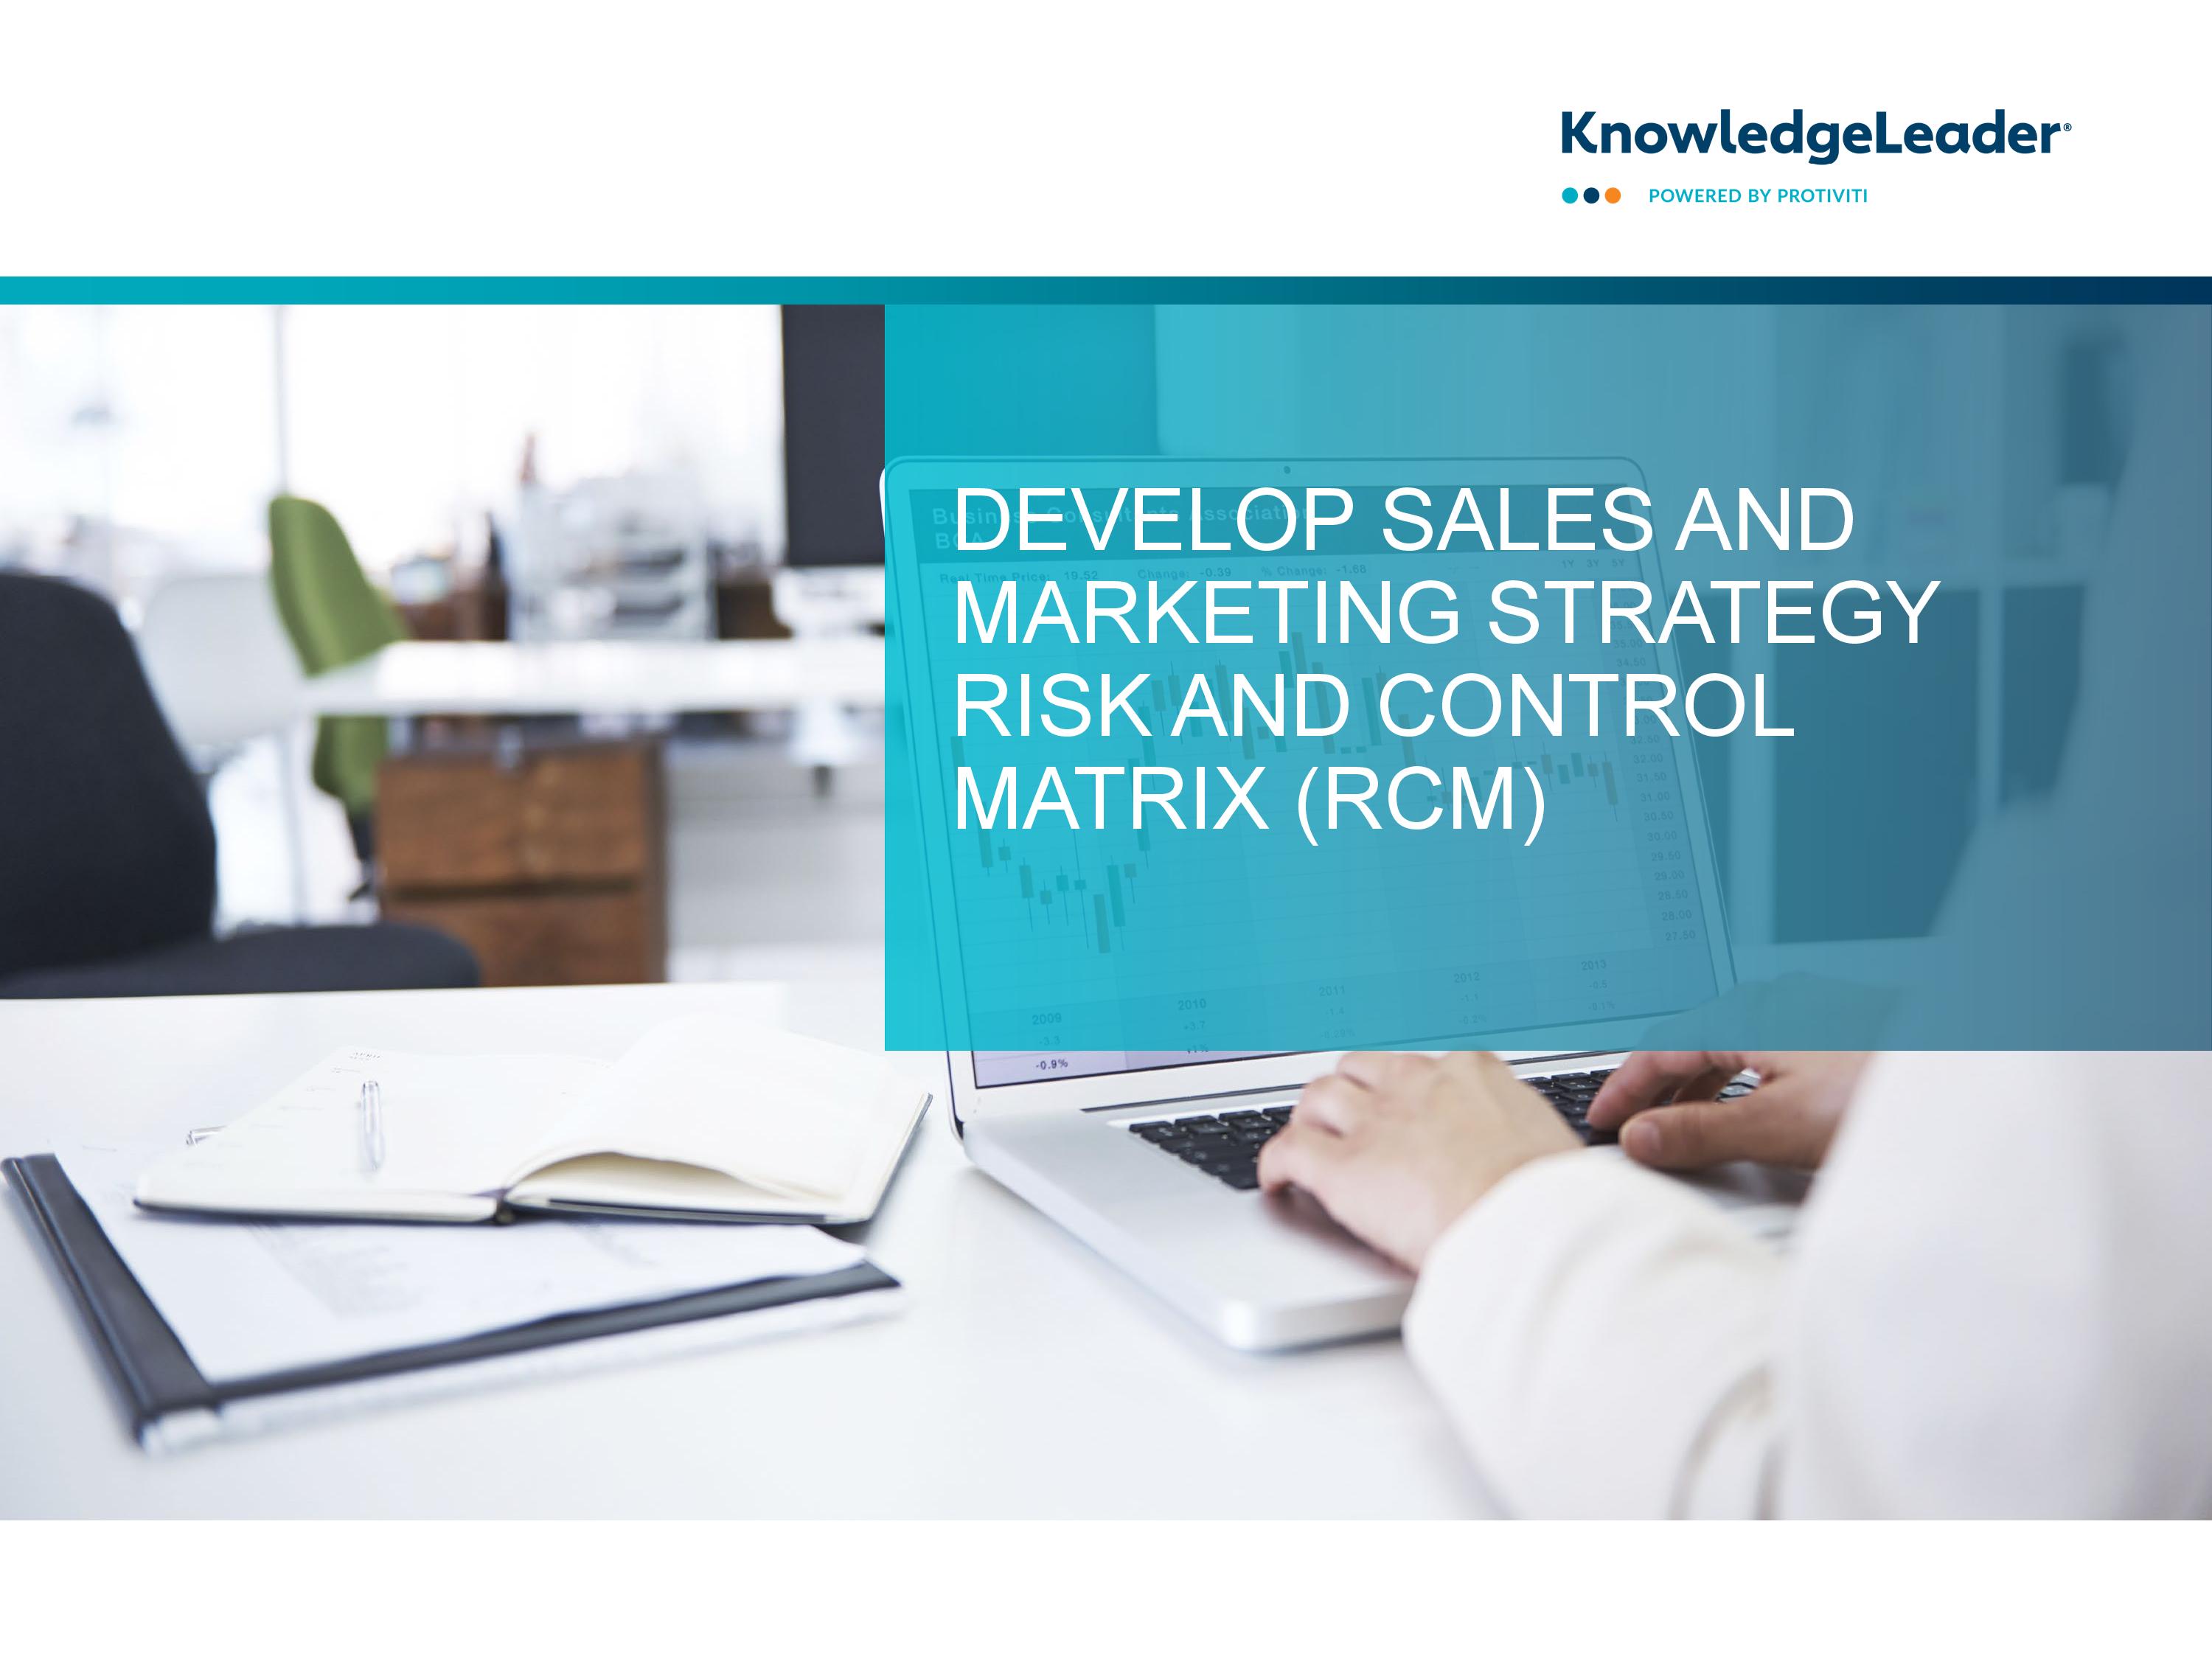 Develop Sales and Marketing Strategy Risk and Control Matrix (RCM)